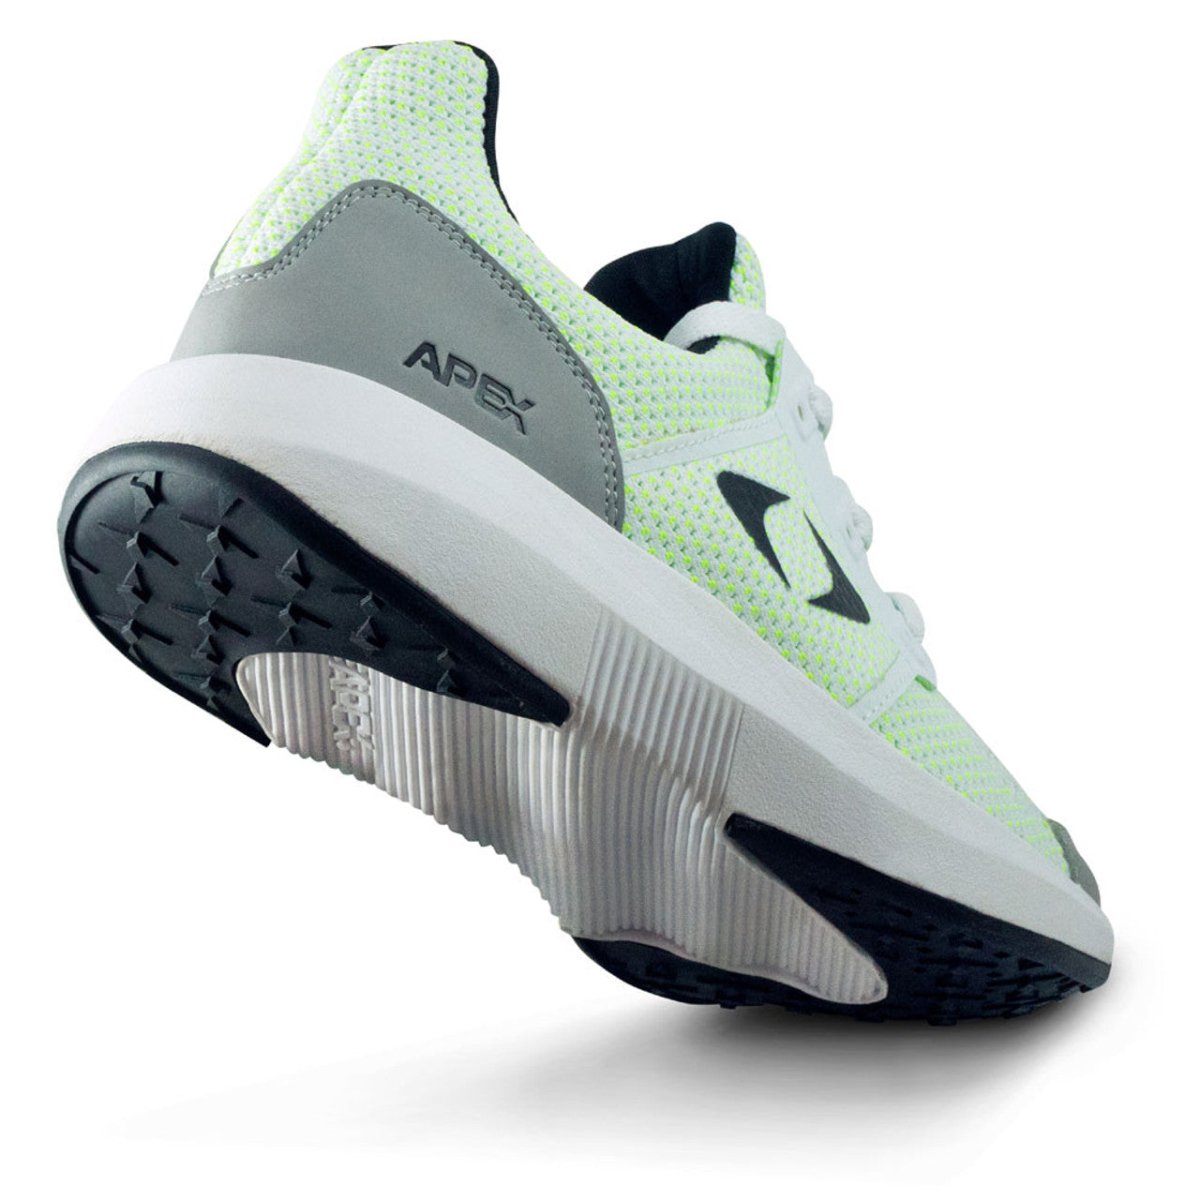 APEX P7100W PERFORMANCE ATHLETIC WOMEN'S SNEAKER IN MINT - TLW Shoes